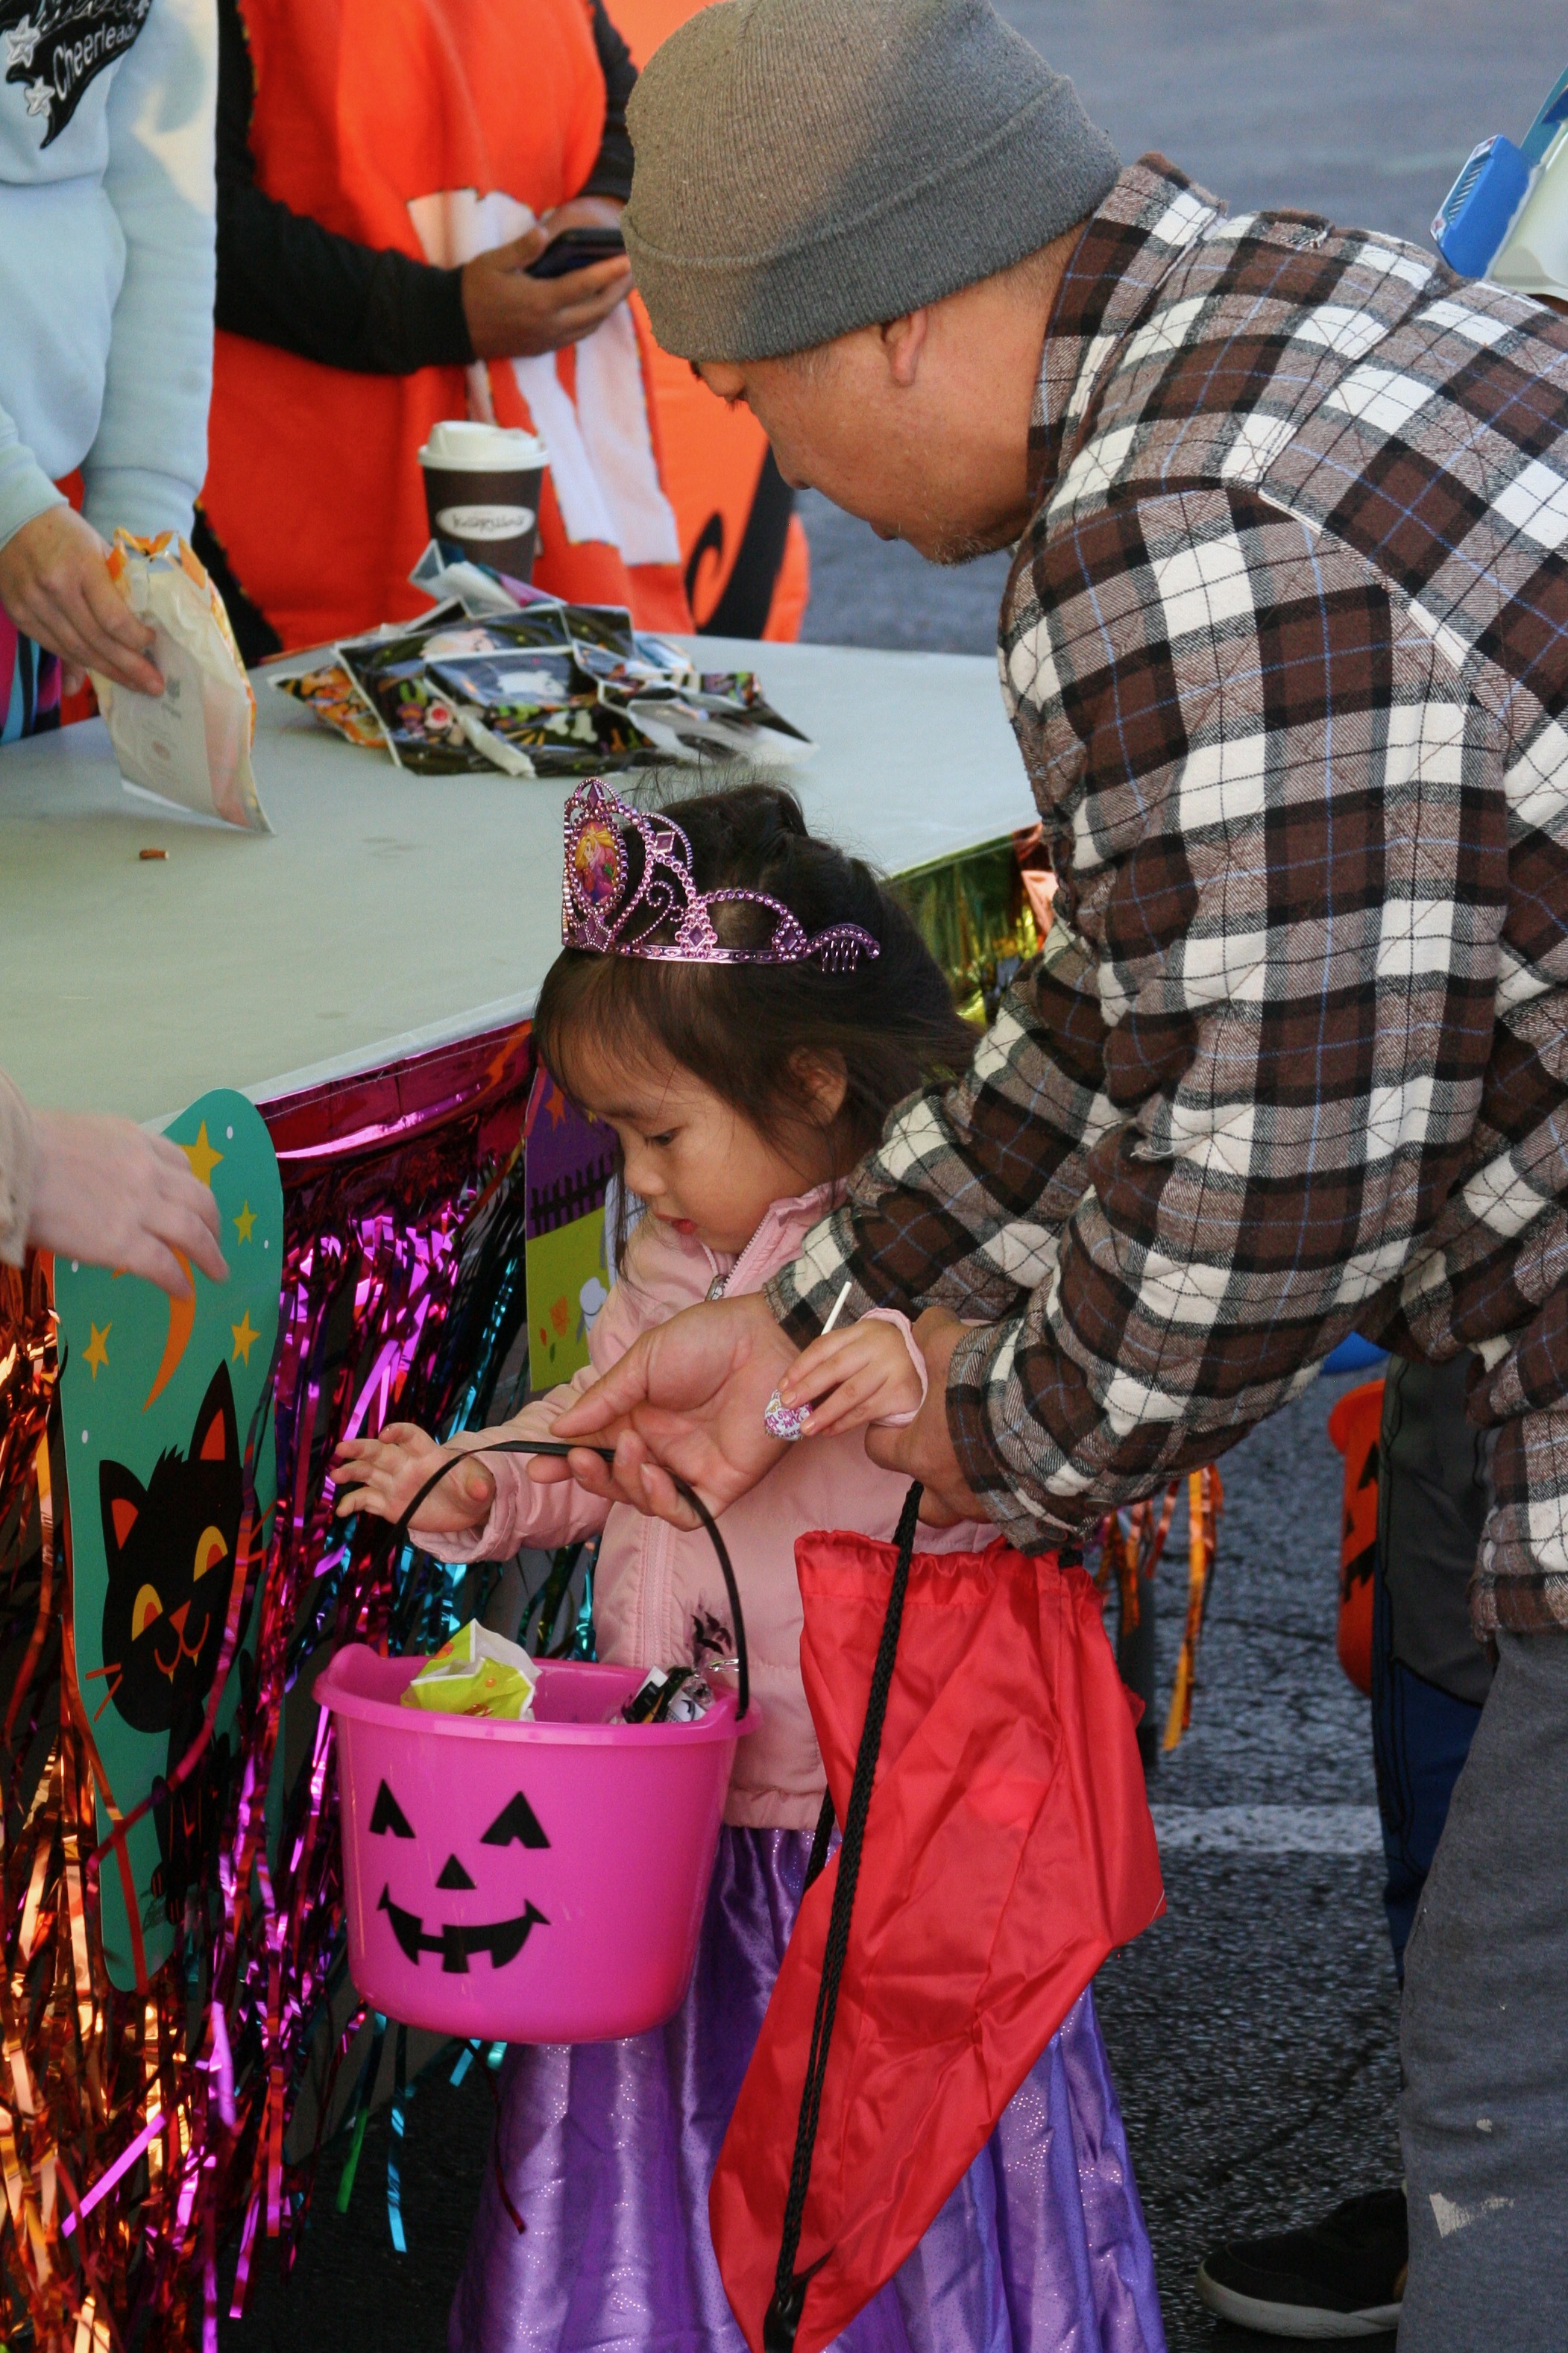 Man with child dressed as princess collecting candy